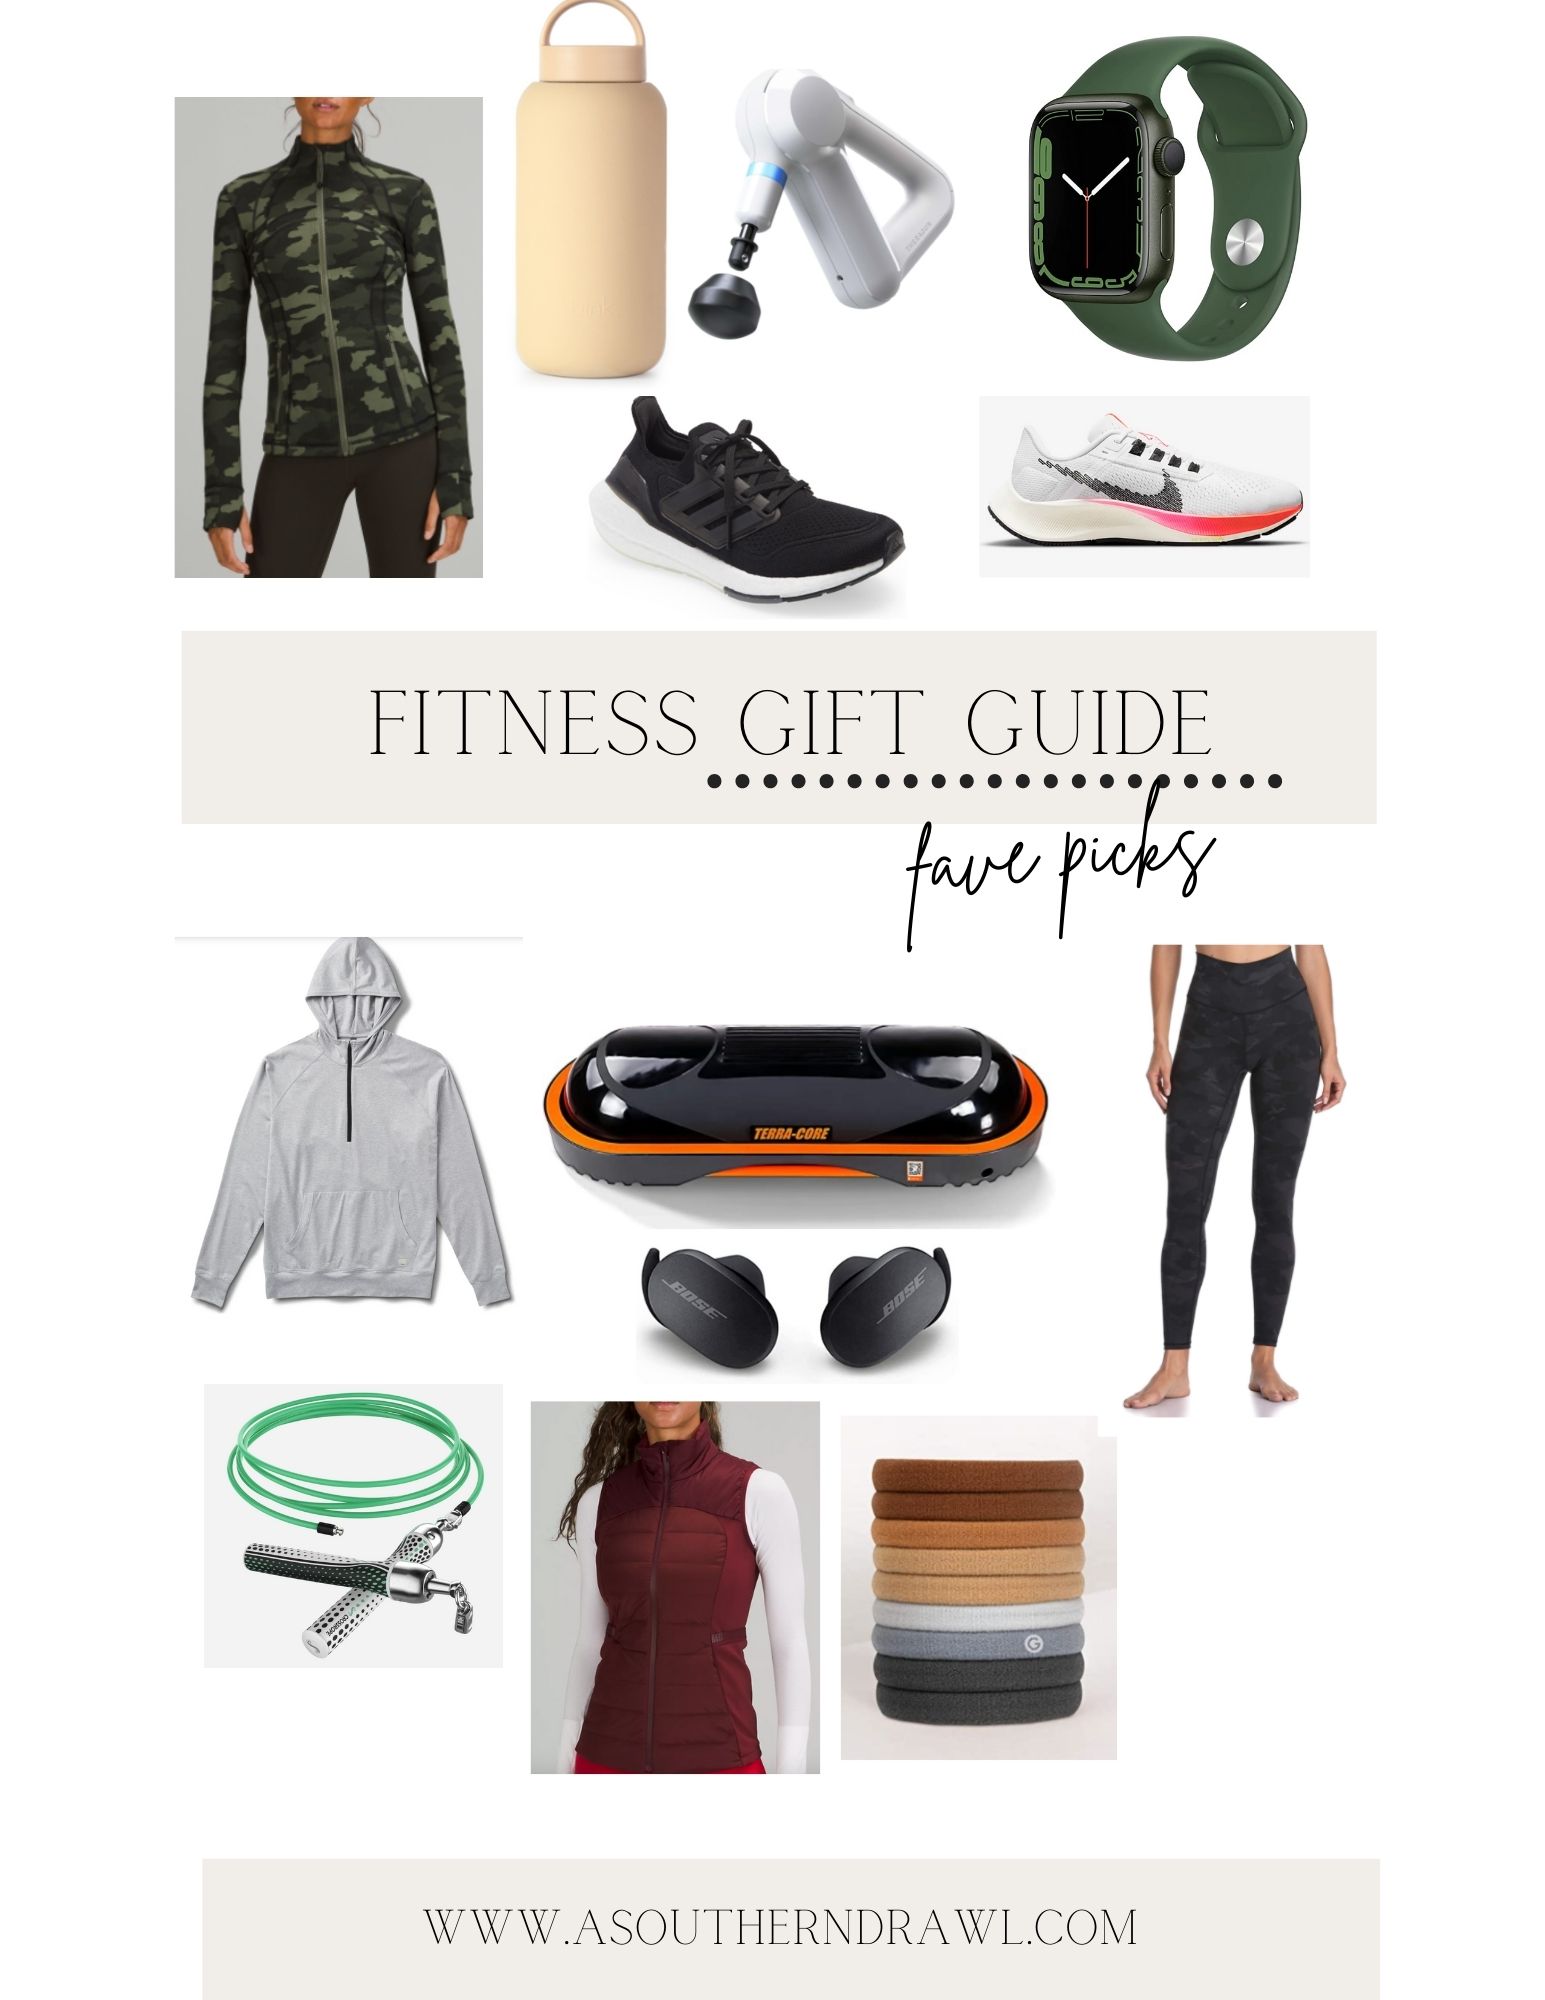 fitness gift guide, gift guide for fitness lover, fitness gifts, activewear gift guide